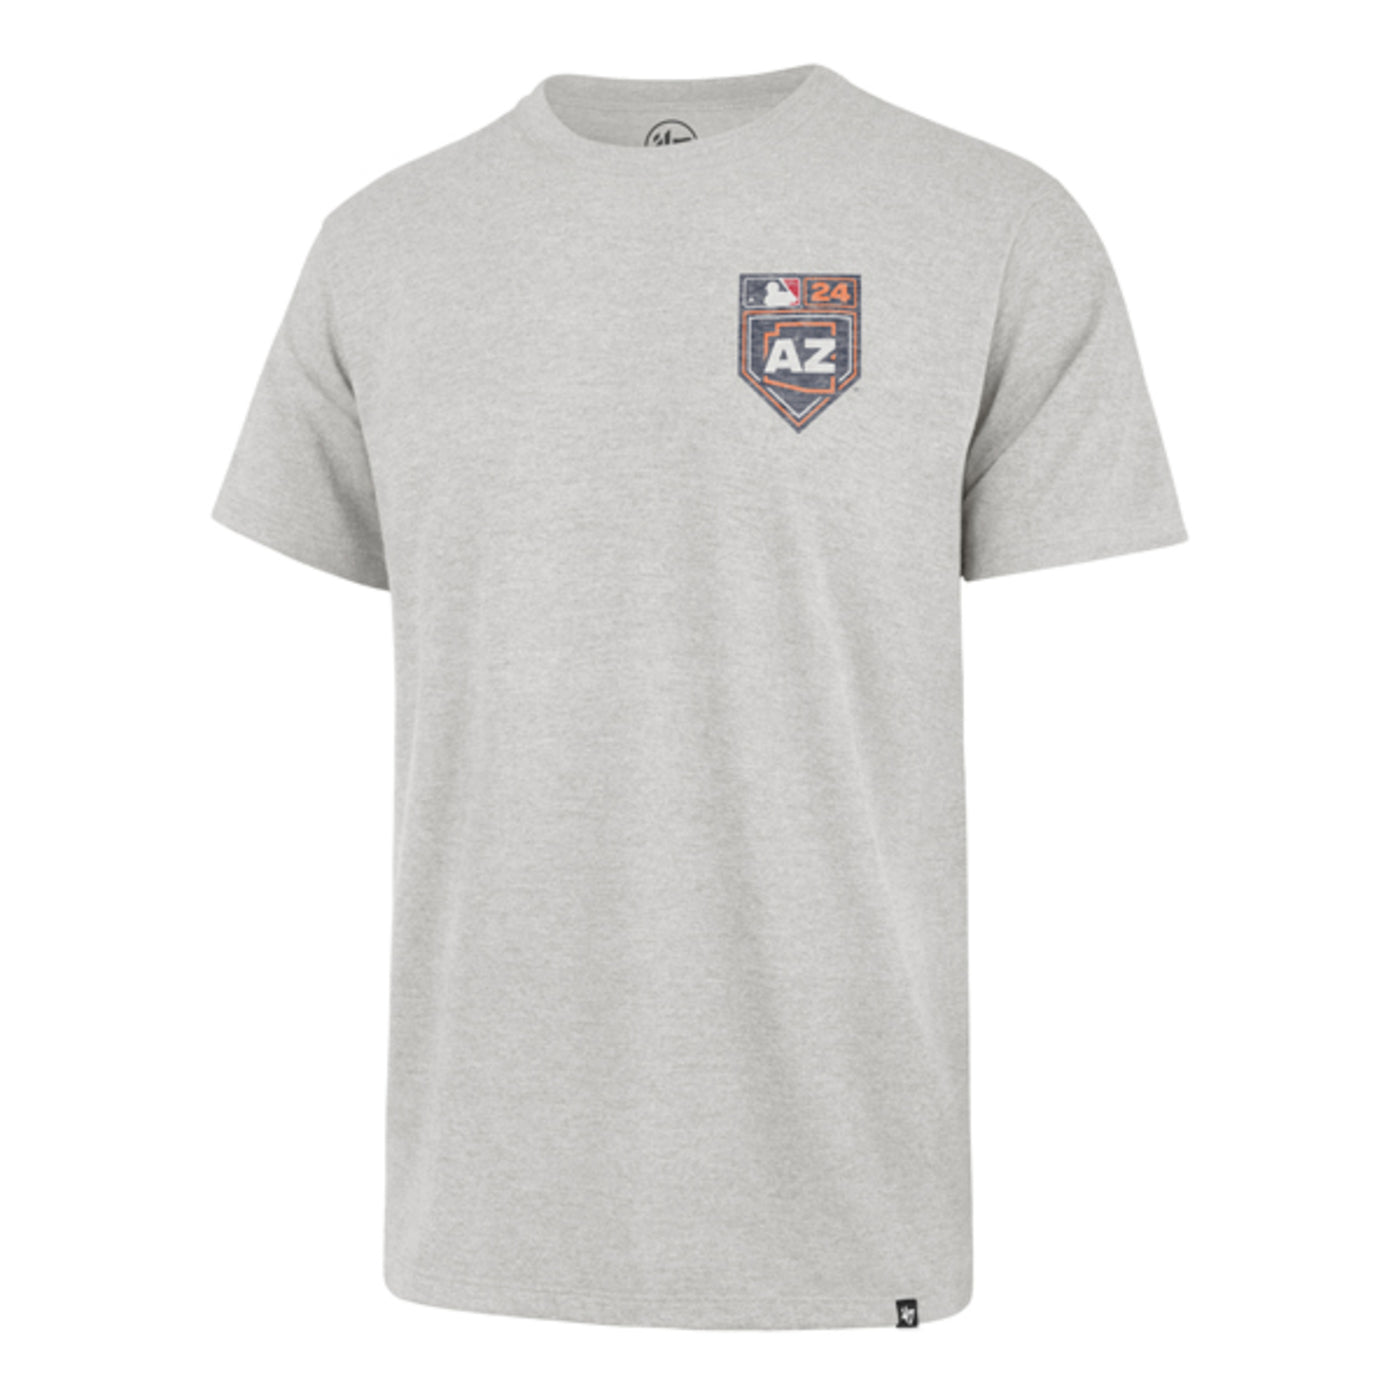 Grey t-shirt with the faded cactus league logo on side of chest.